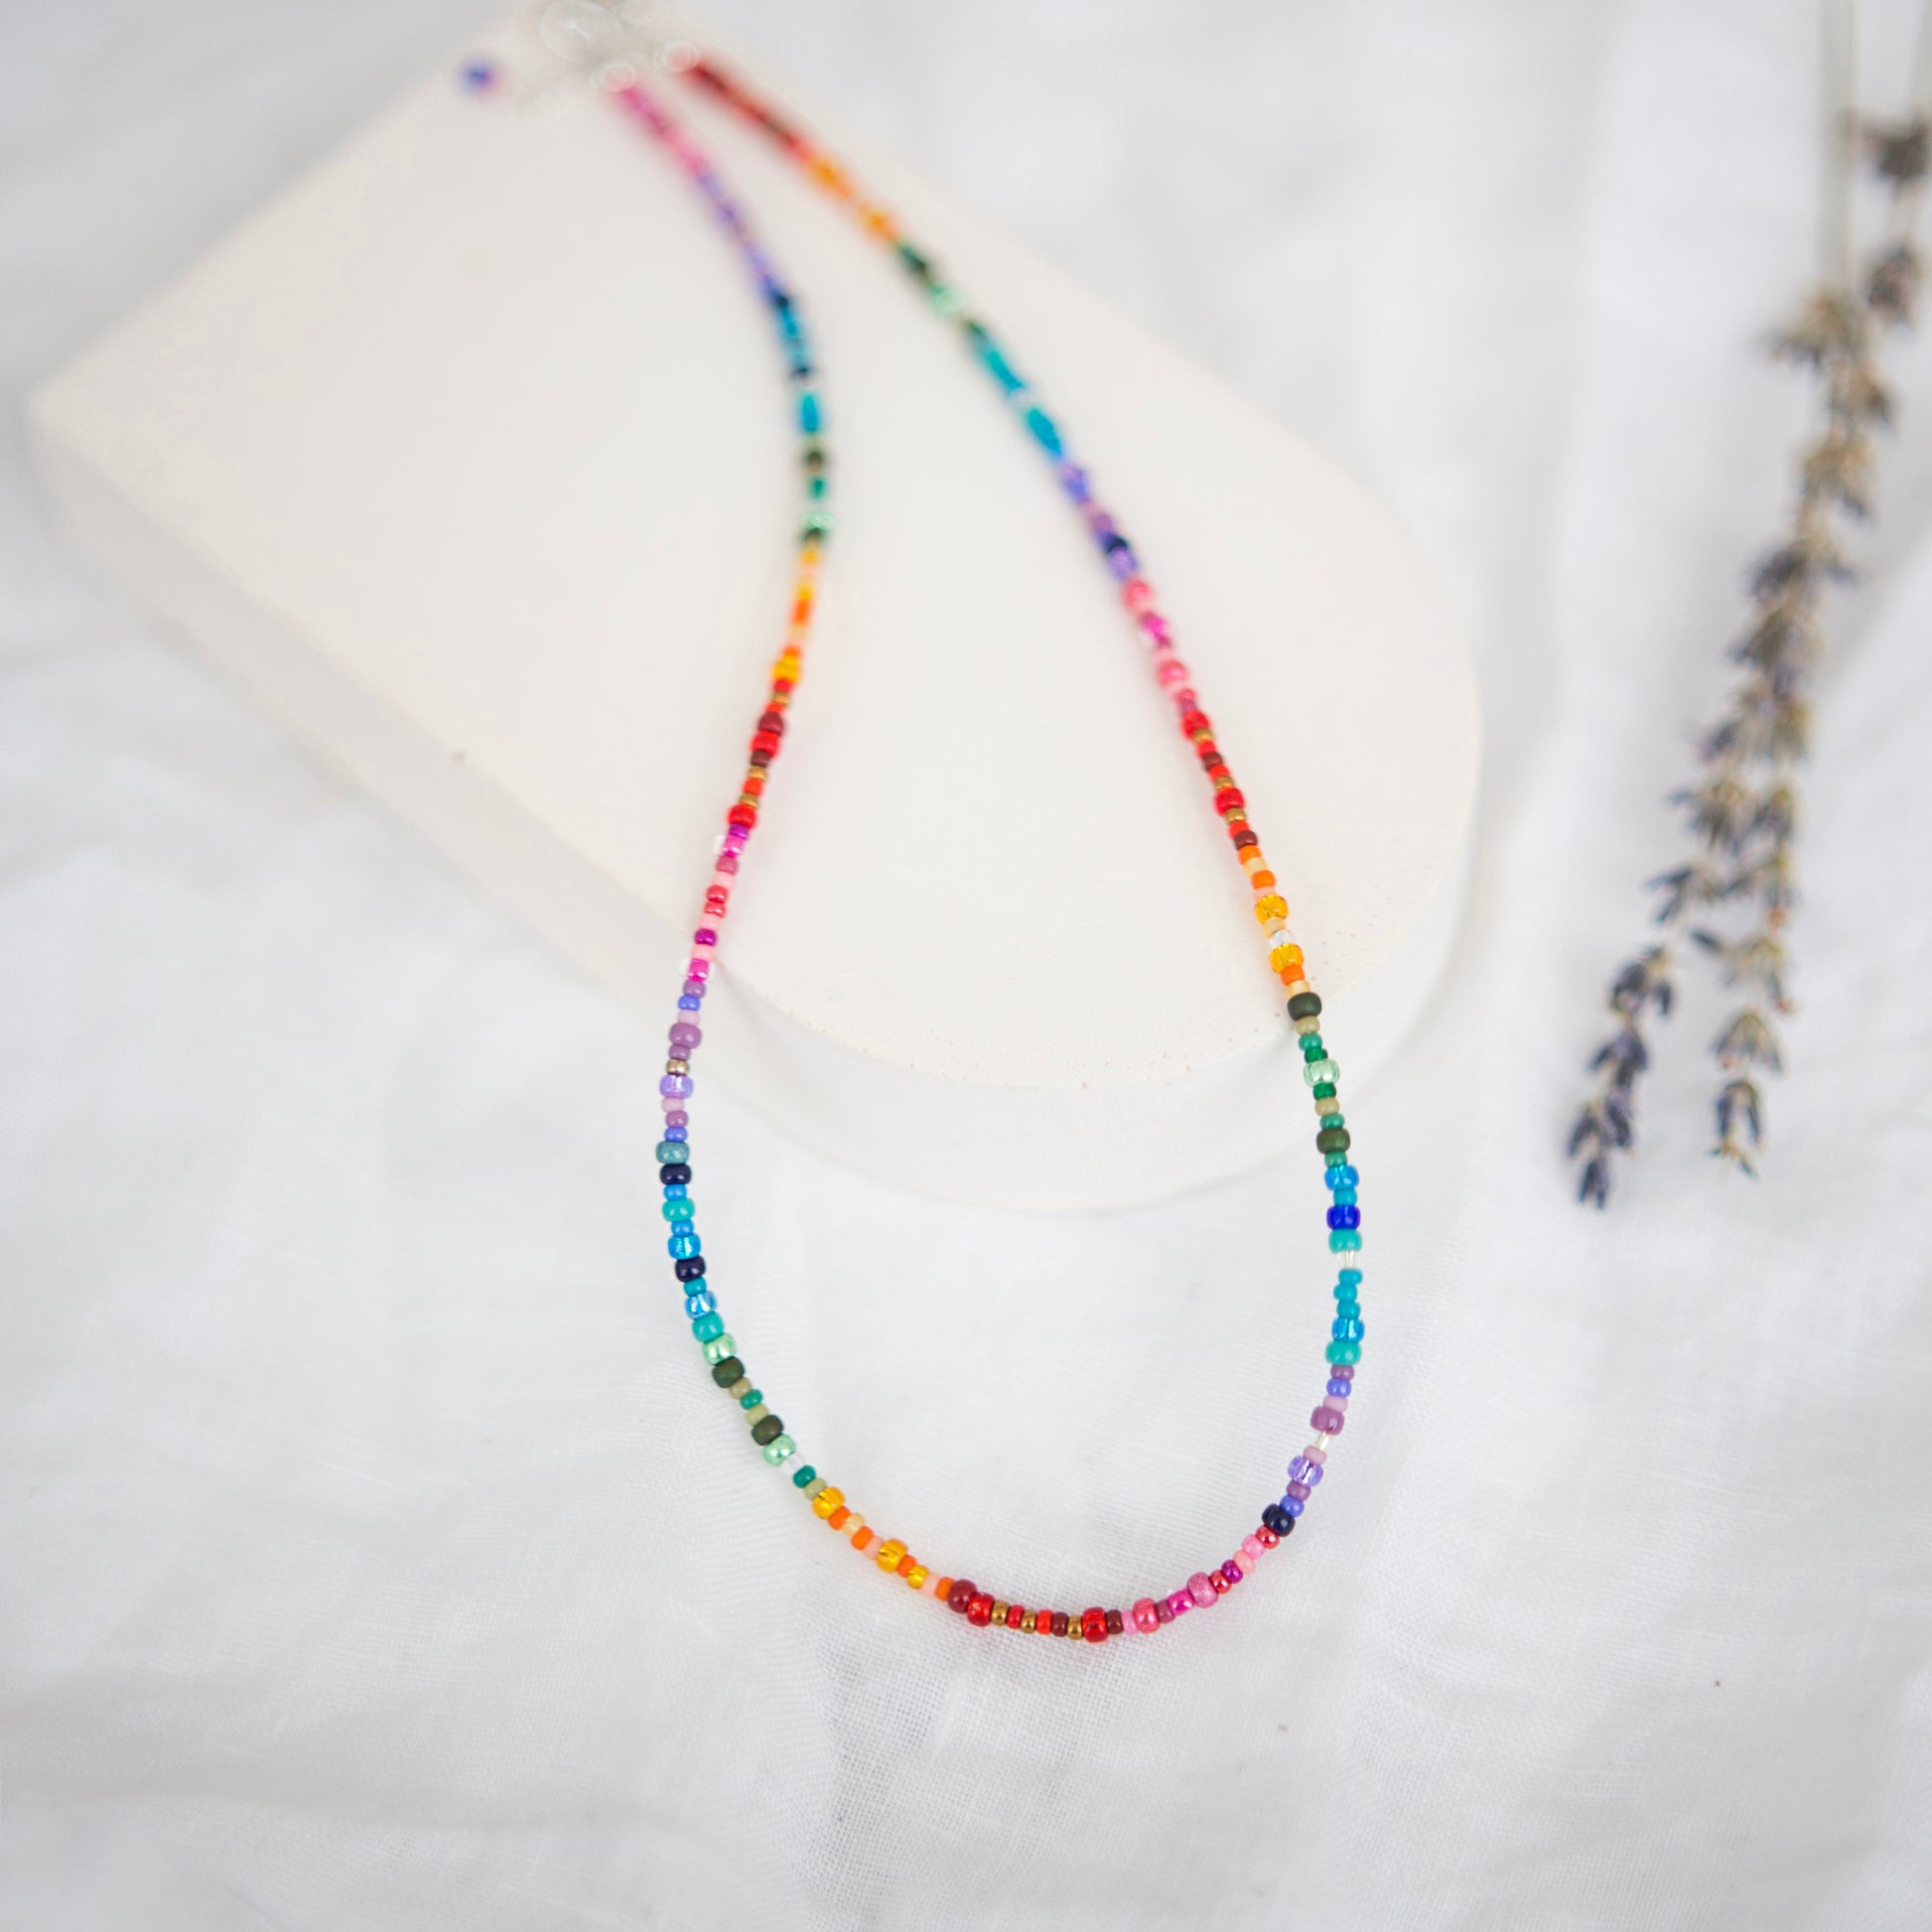 Colourful thin rainbow necklace with seed beads ombre rainbow